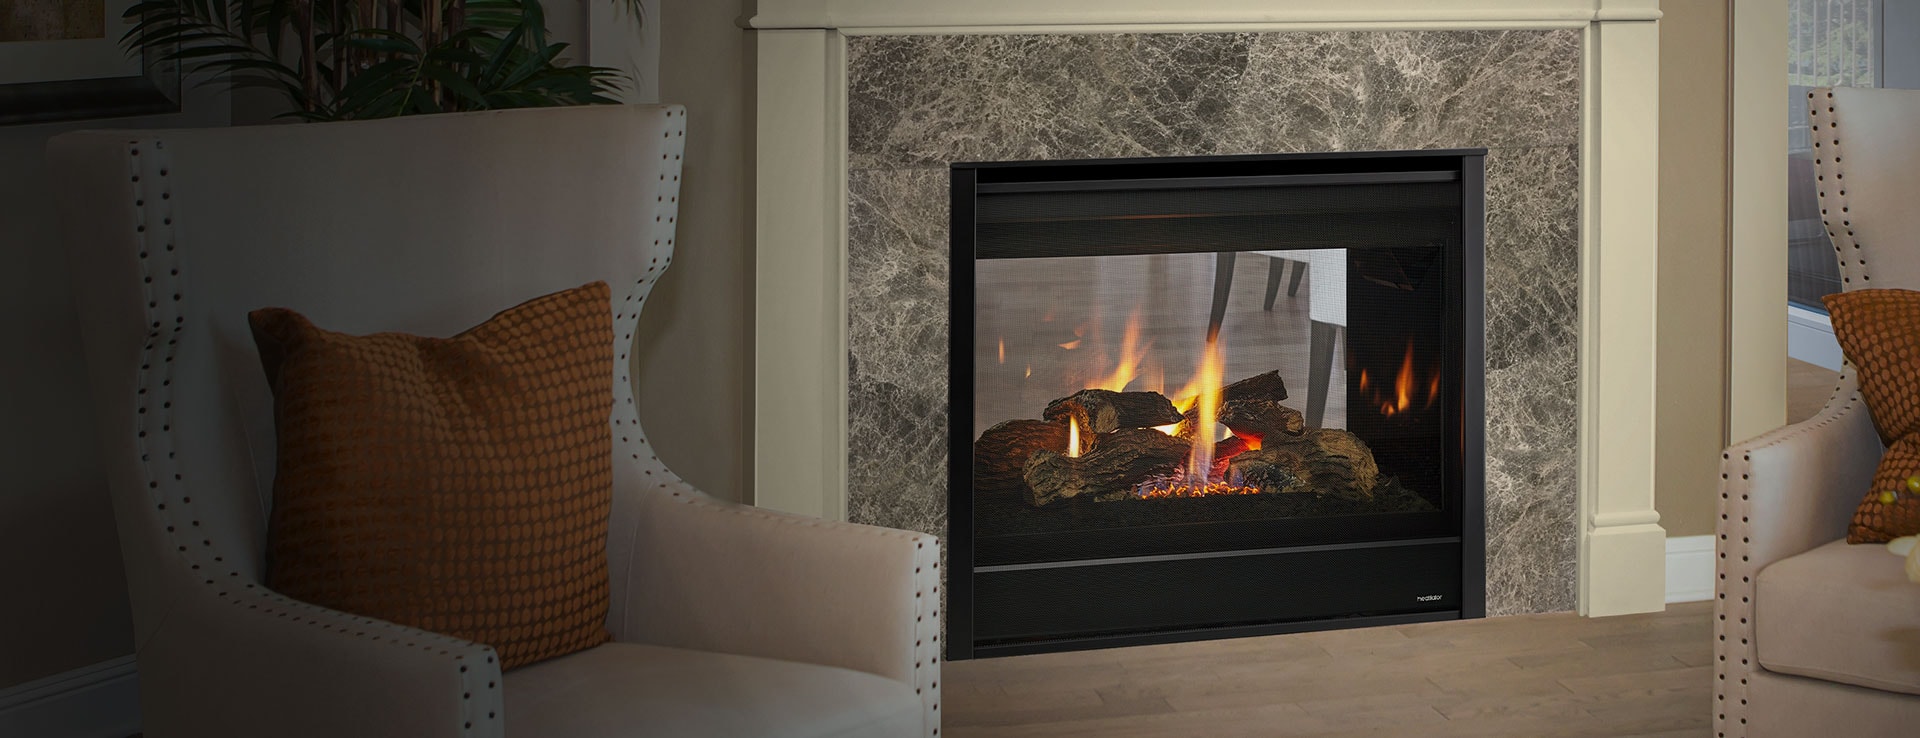 Heatilator Gas Fireplace Awesome Product Specifications